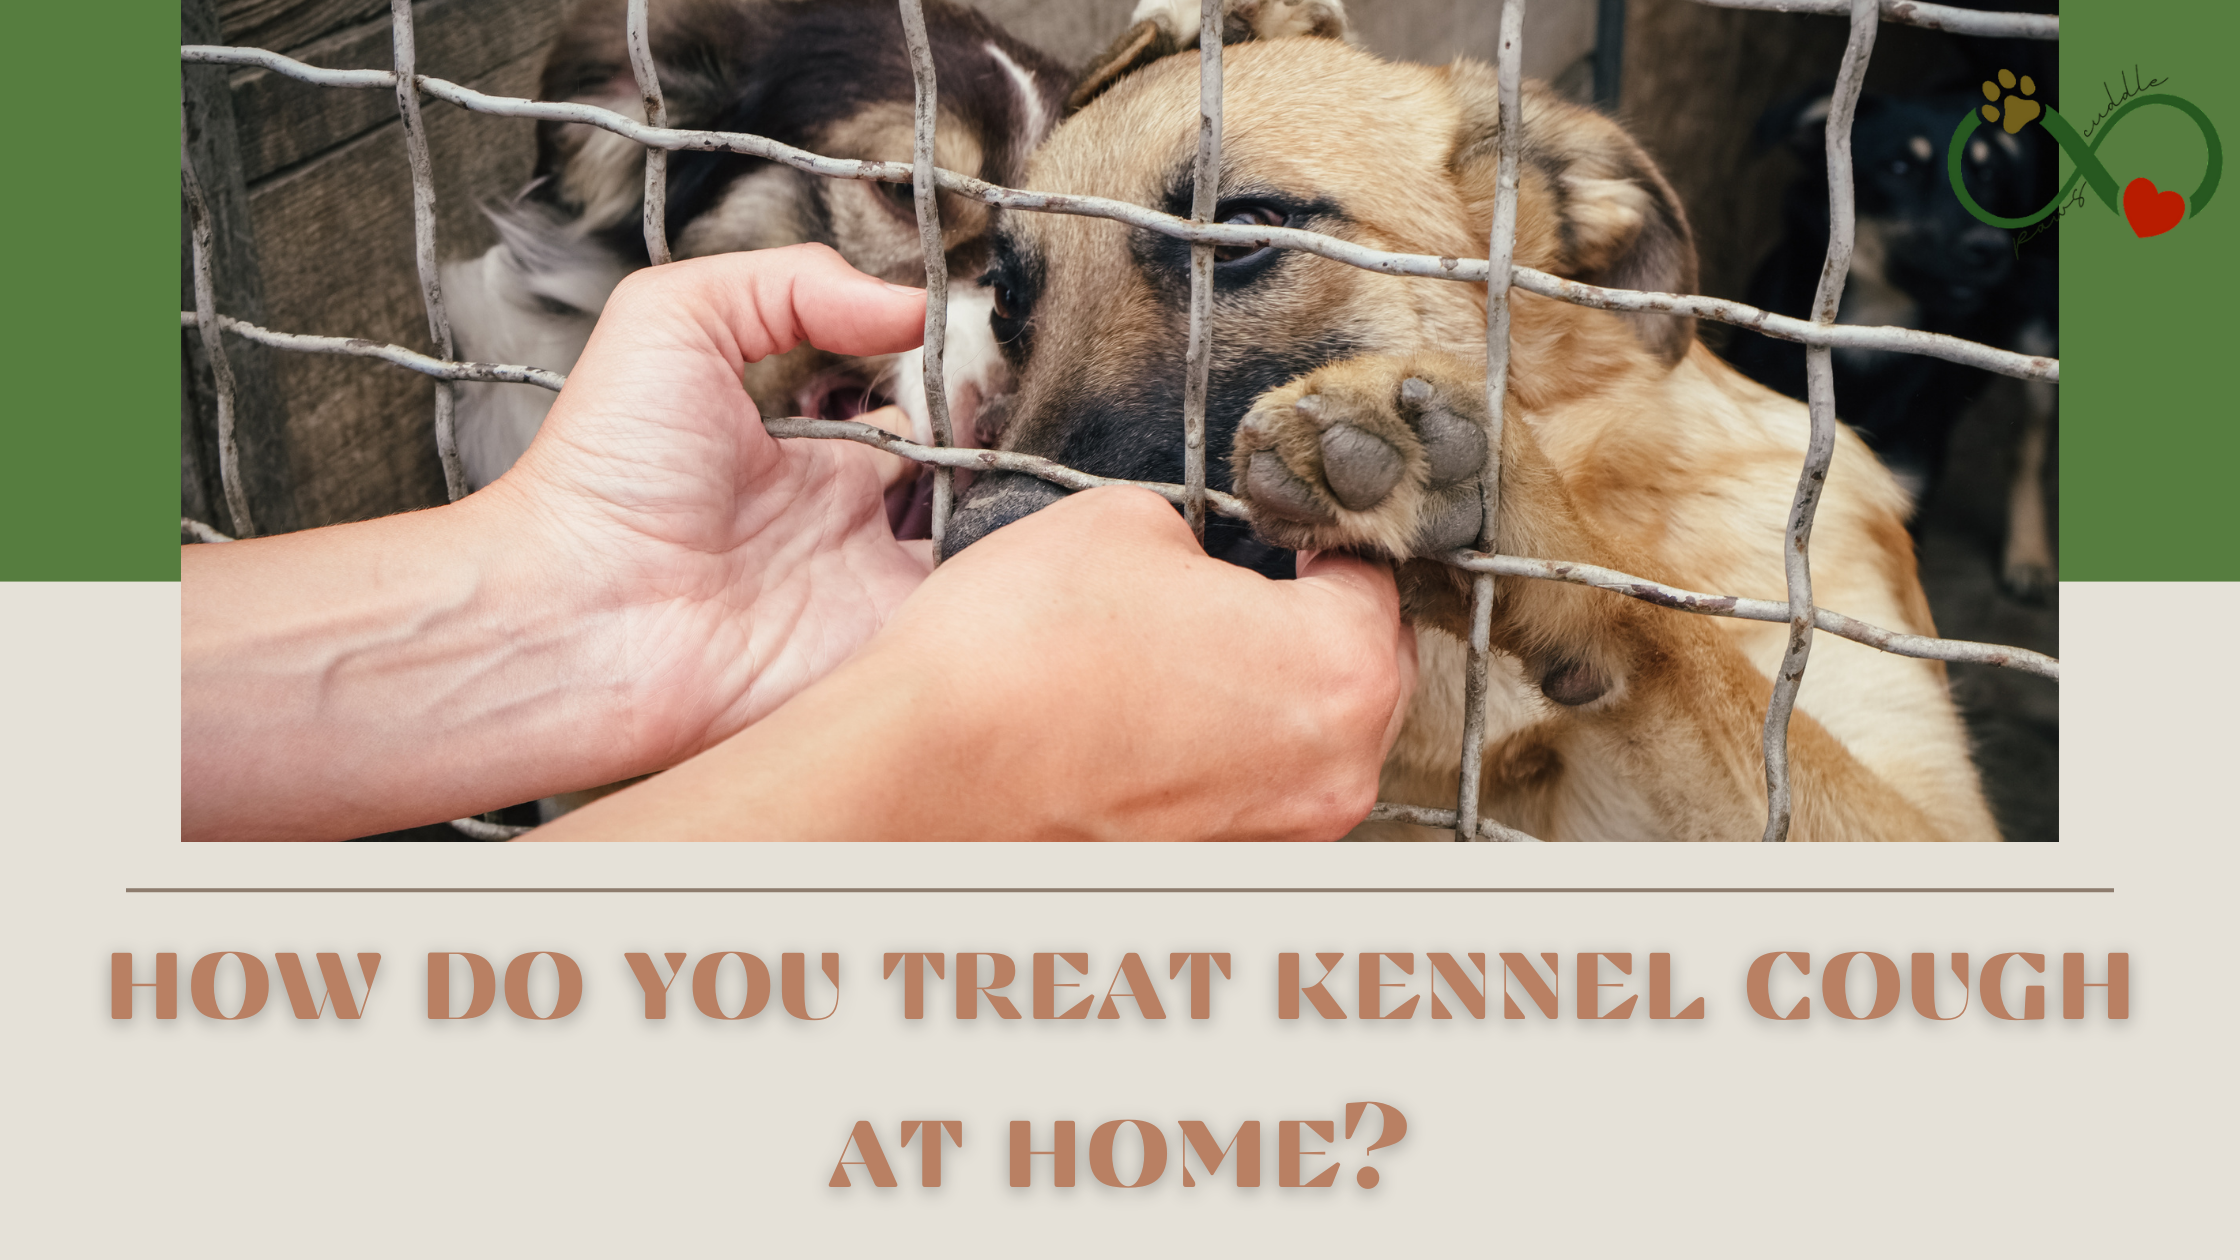 how do you treat kennel cough at home?